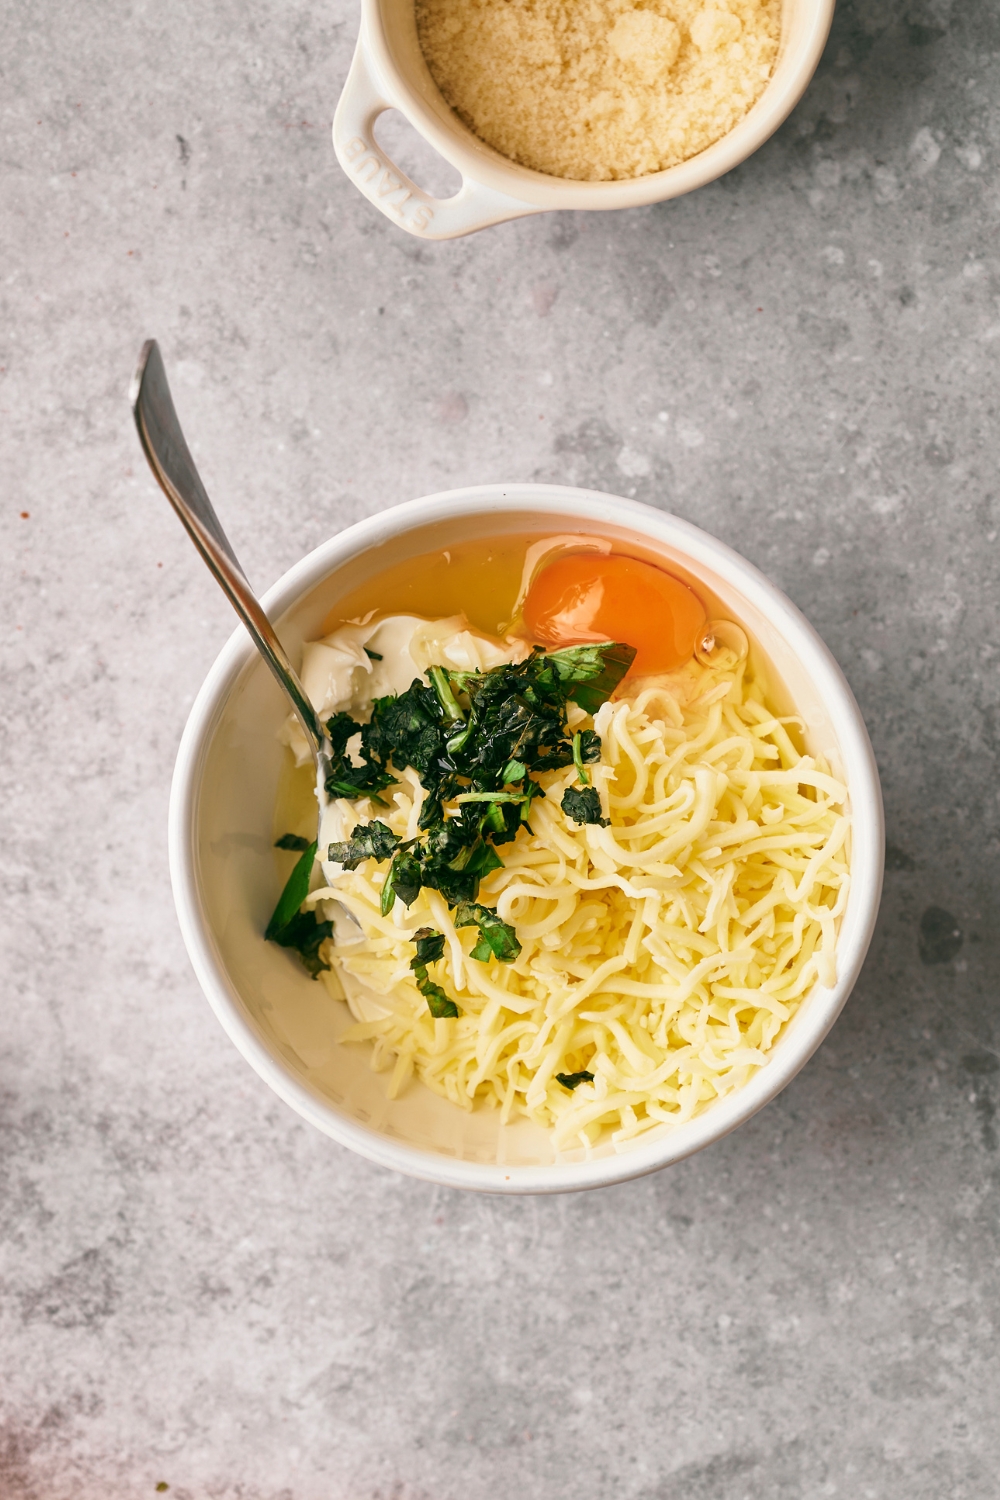 Shredded cheese, an egg, basil, and ricotta cheese in a bowl.